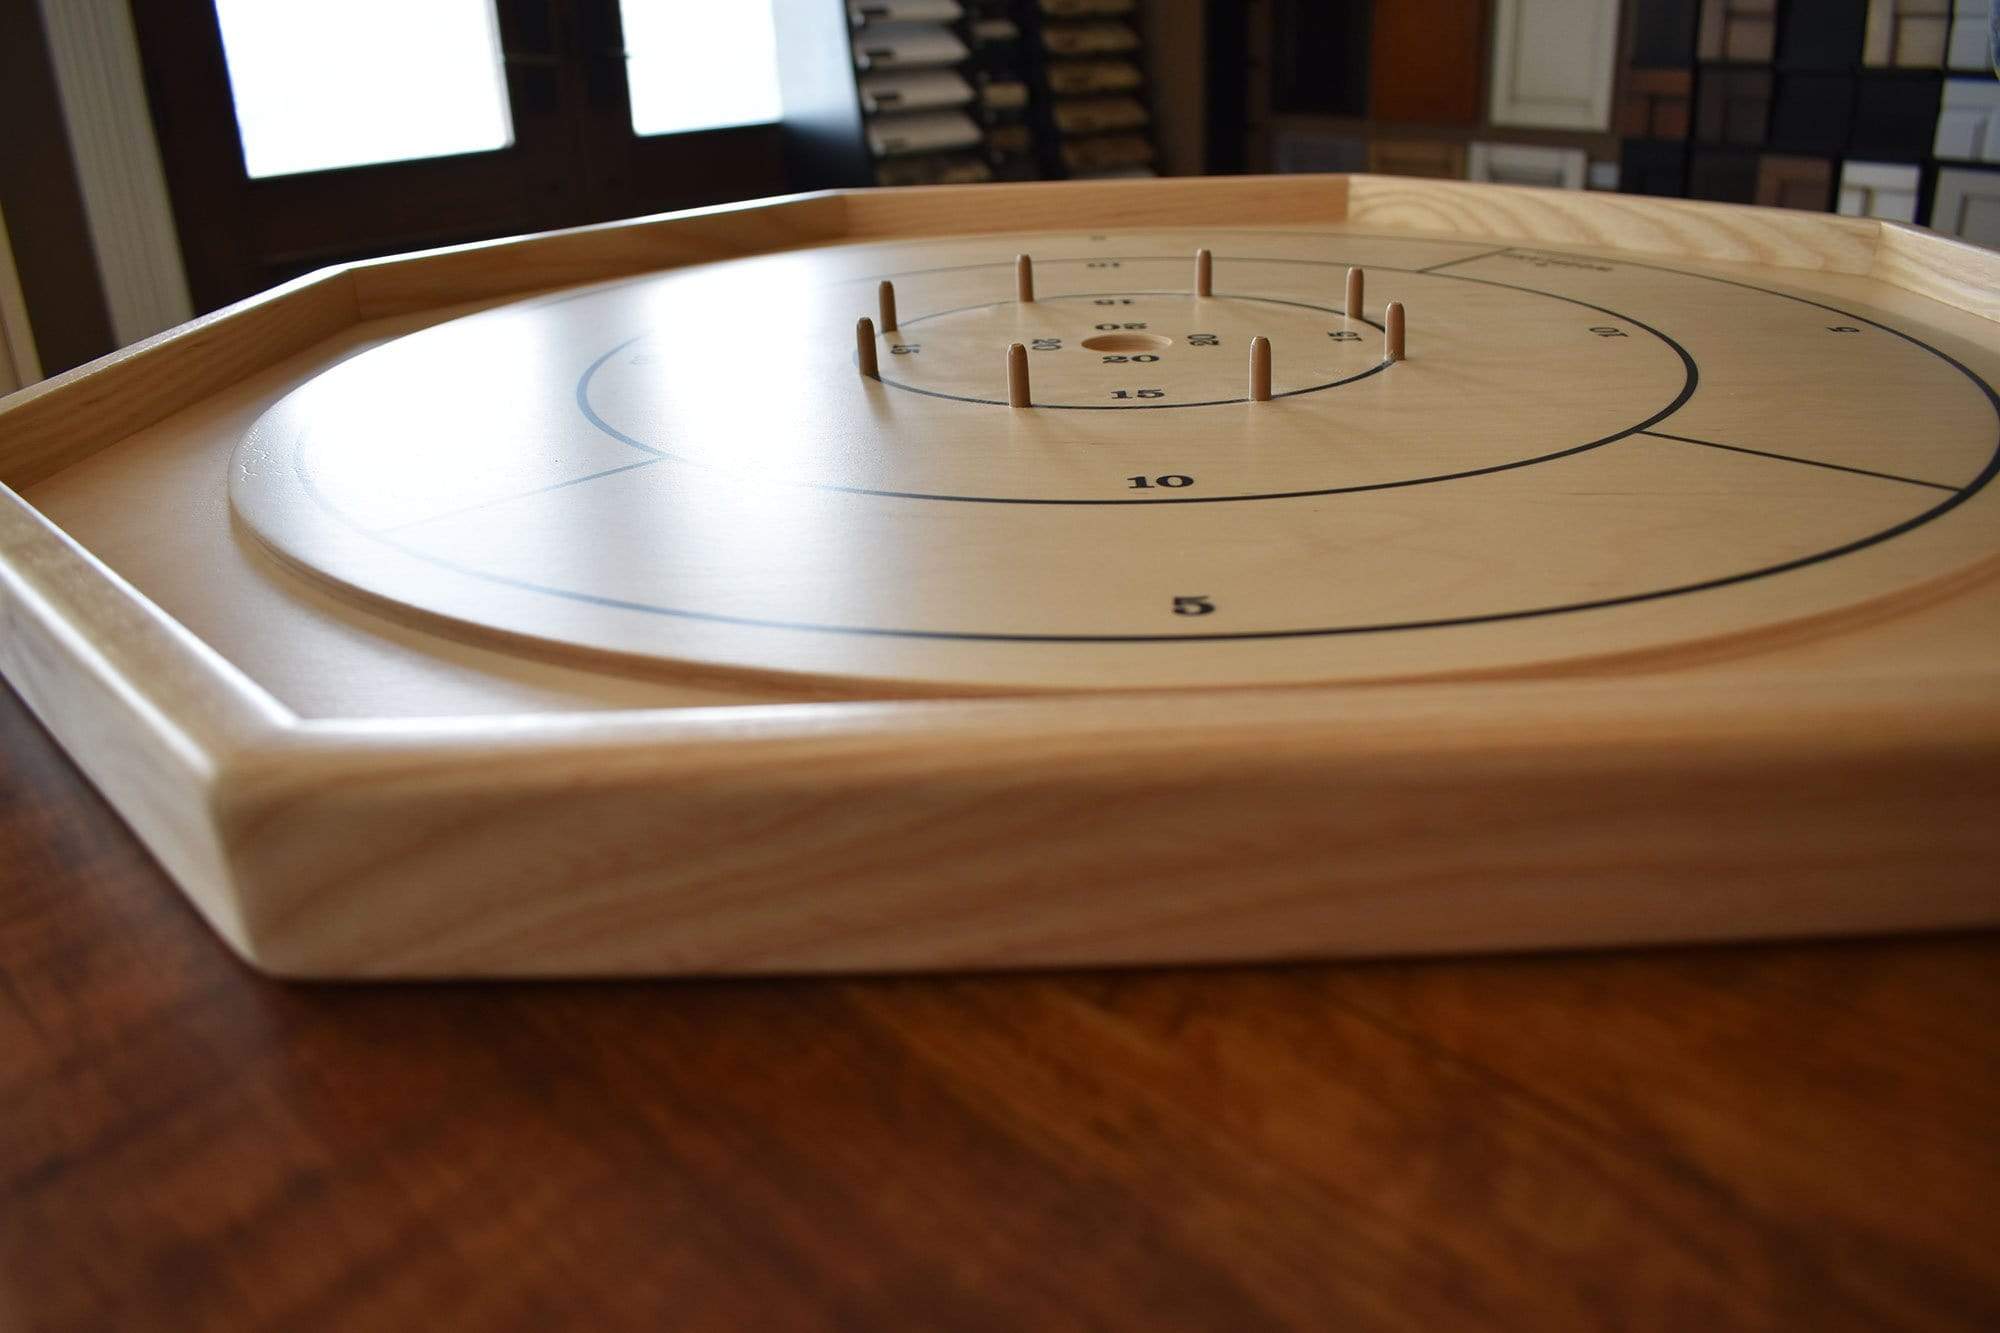 The Gold Standard - Traditional Crokinole Board Game Set